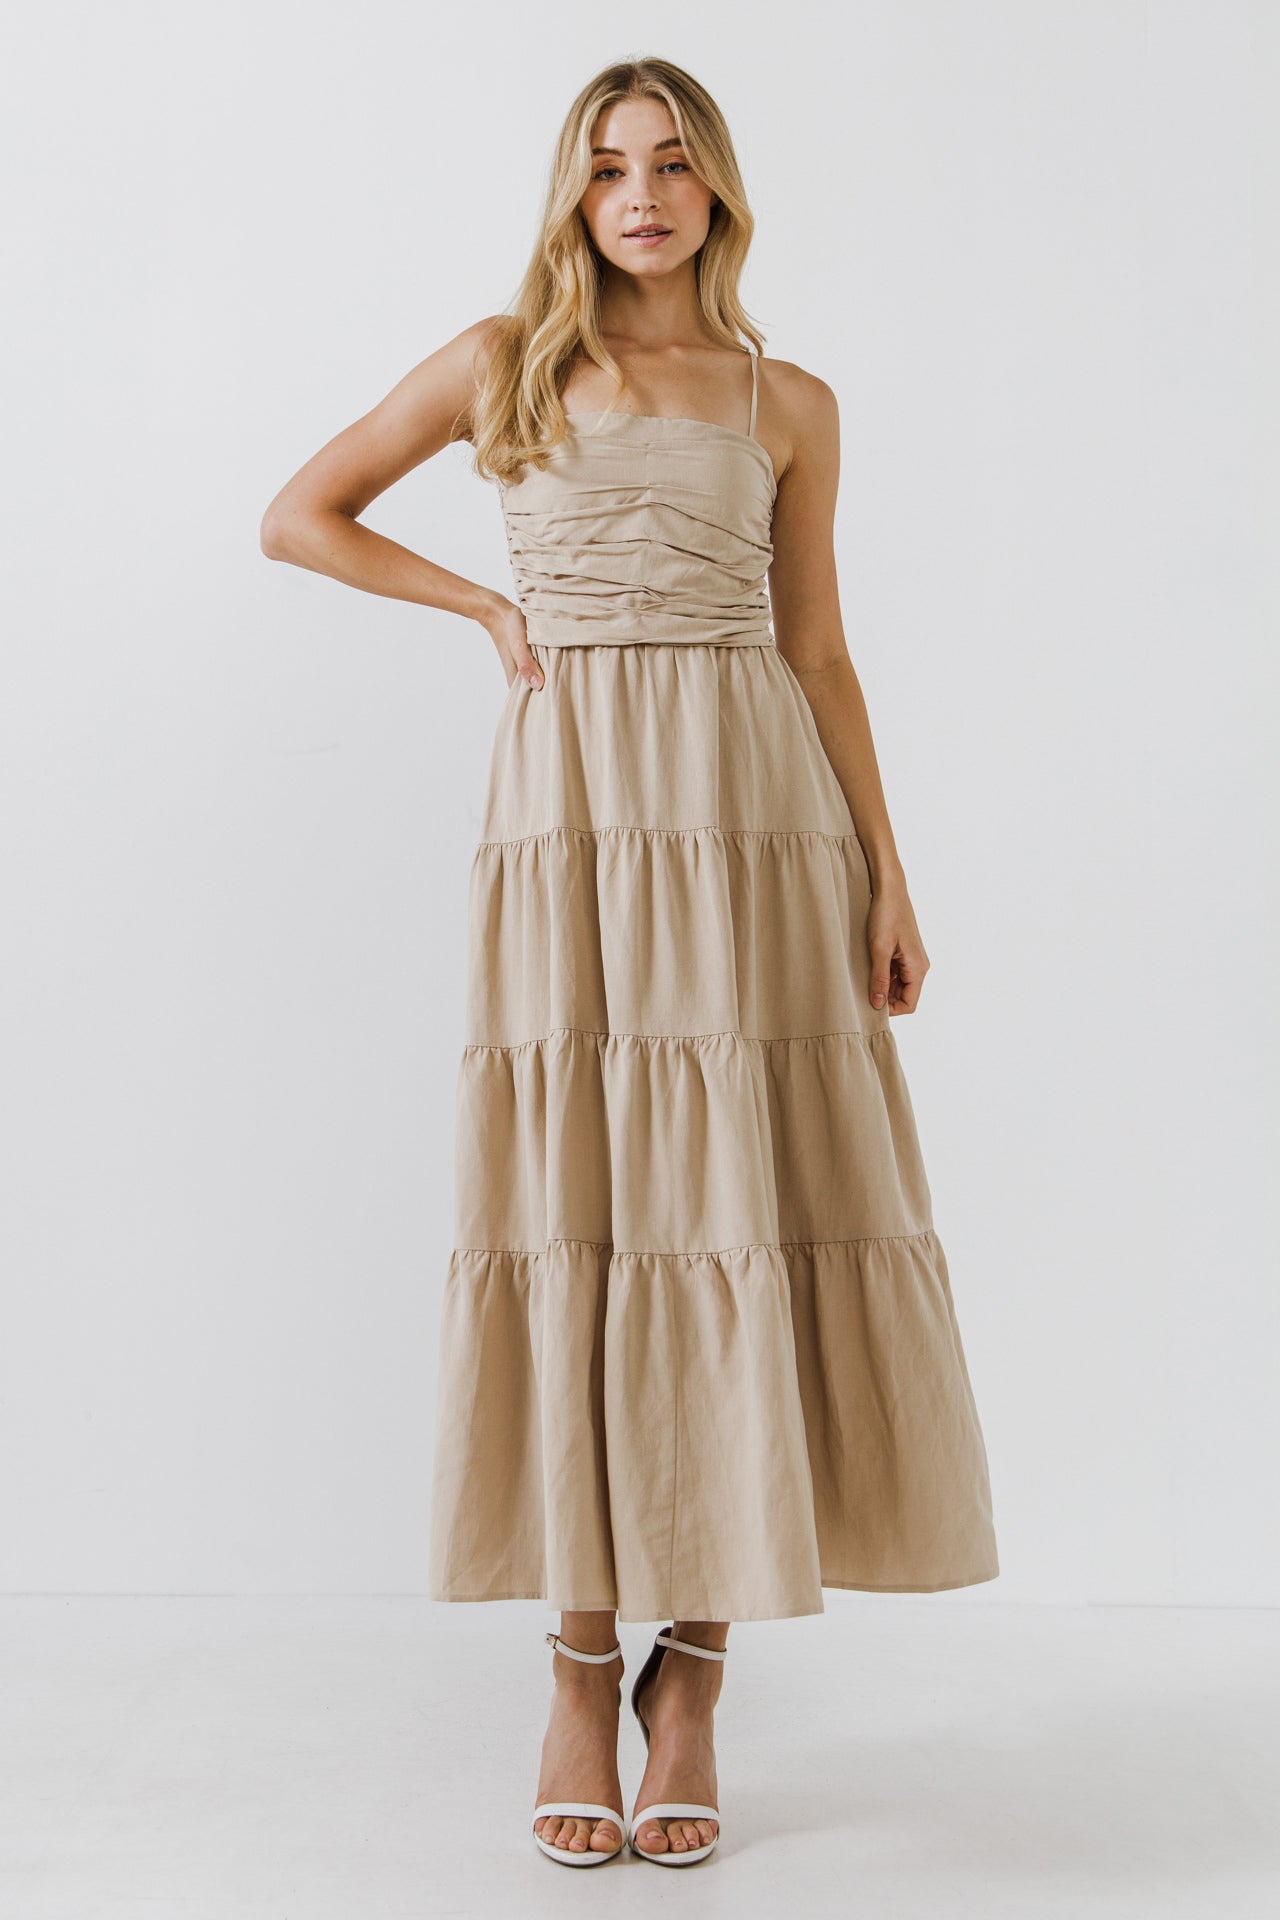 FREE THE ROSES - Strappy Draped Linen Dress - DRESSES available at Objectrare